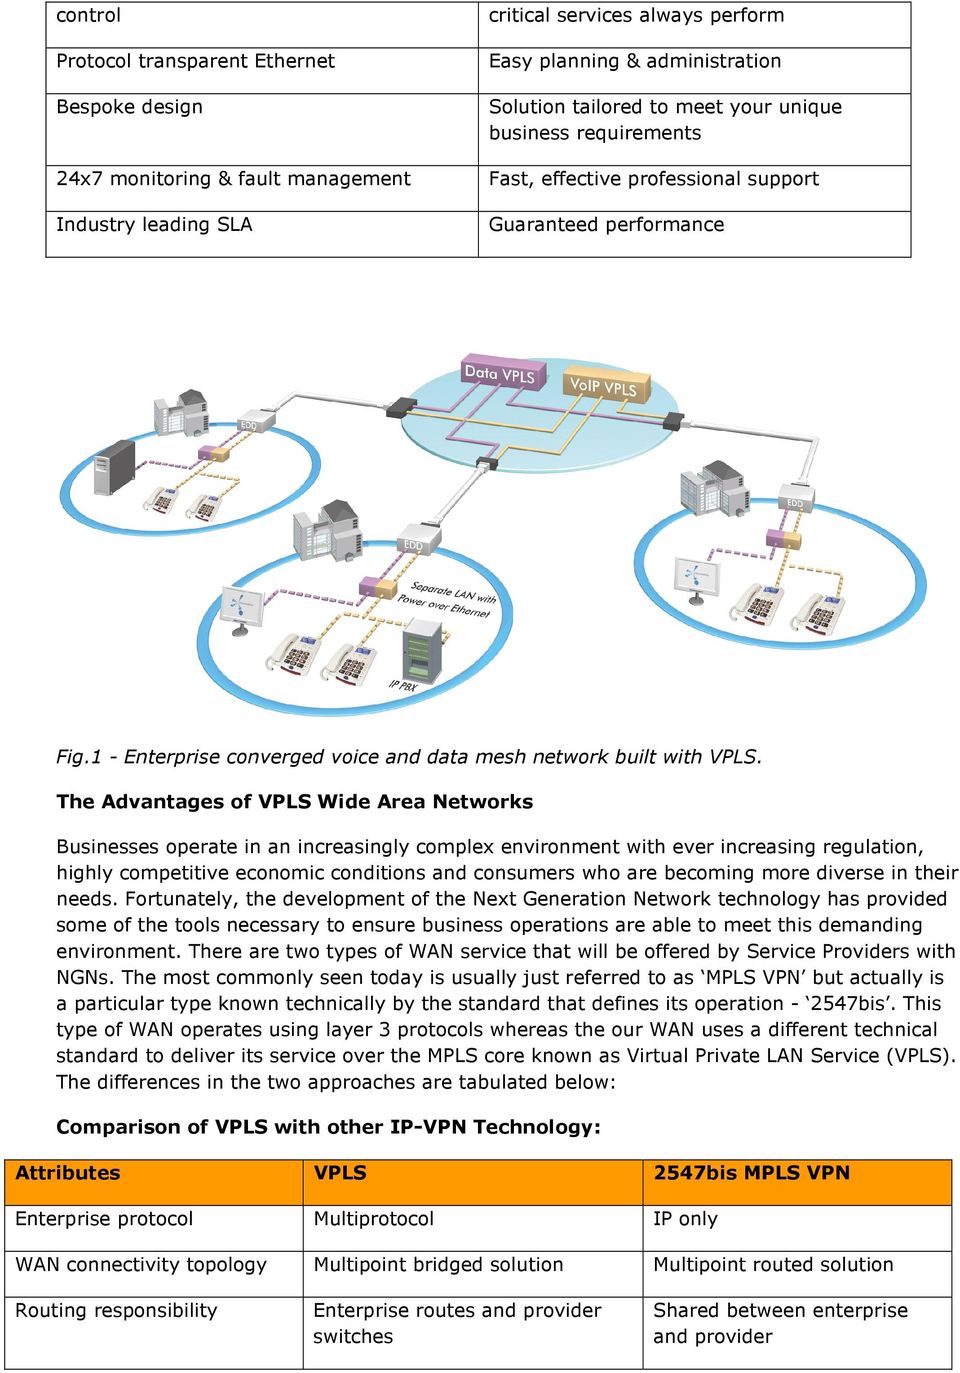 The Advantages of VPLS Wide Area Networks Businesses operate in an increasingly complex environment with ever increasing regulation, highly competitive economic conditions and consumers who are